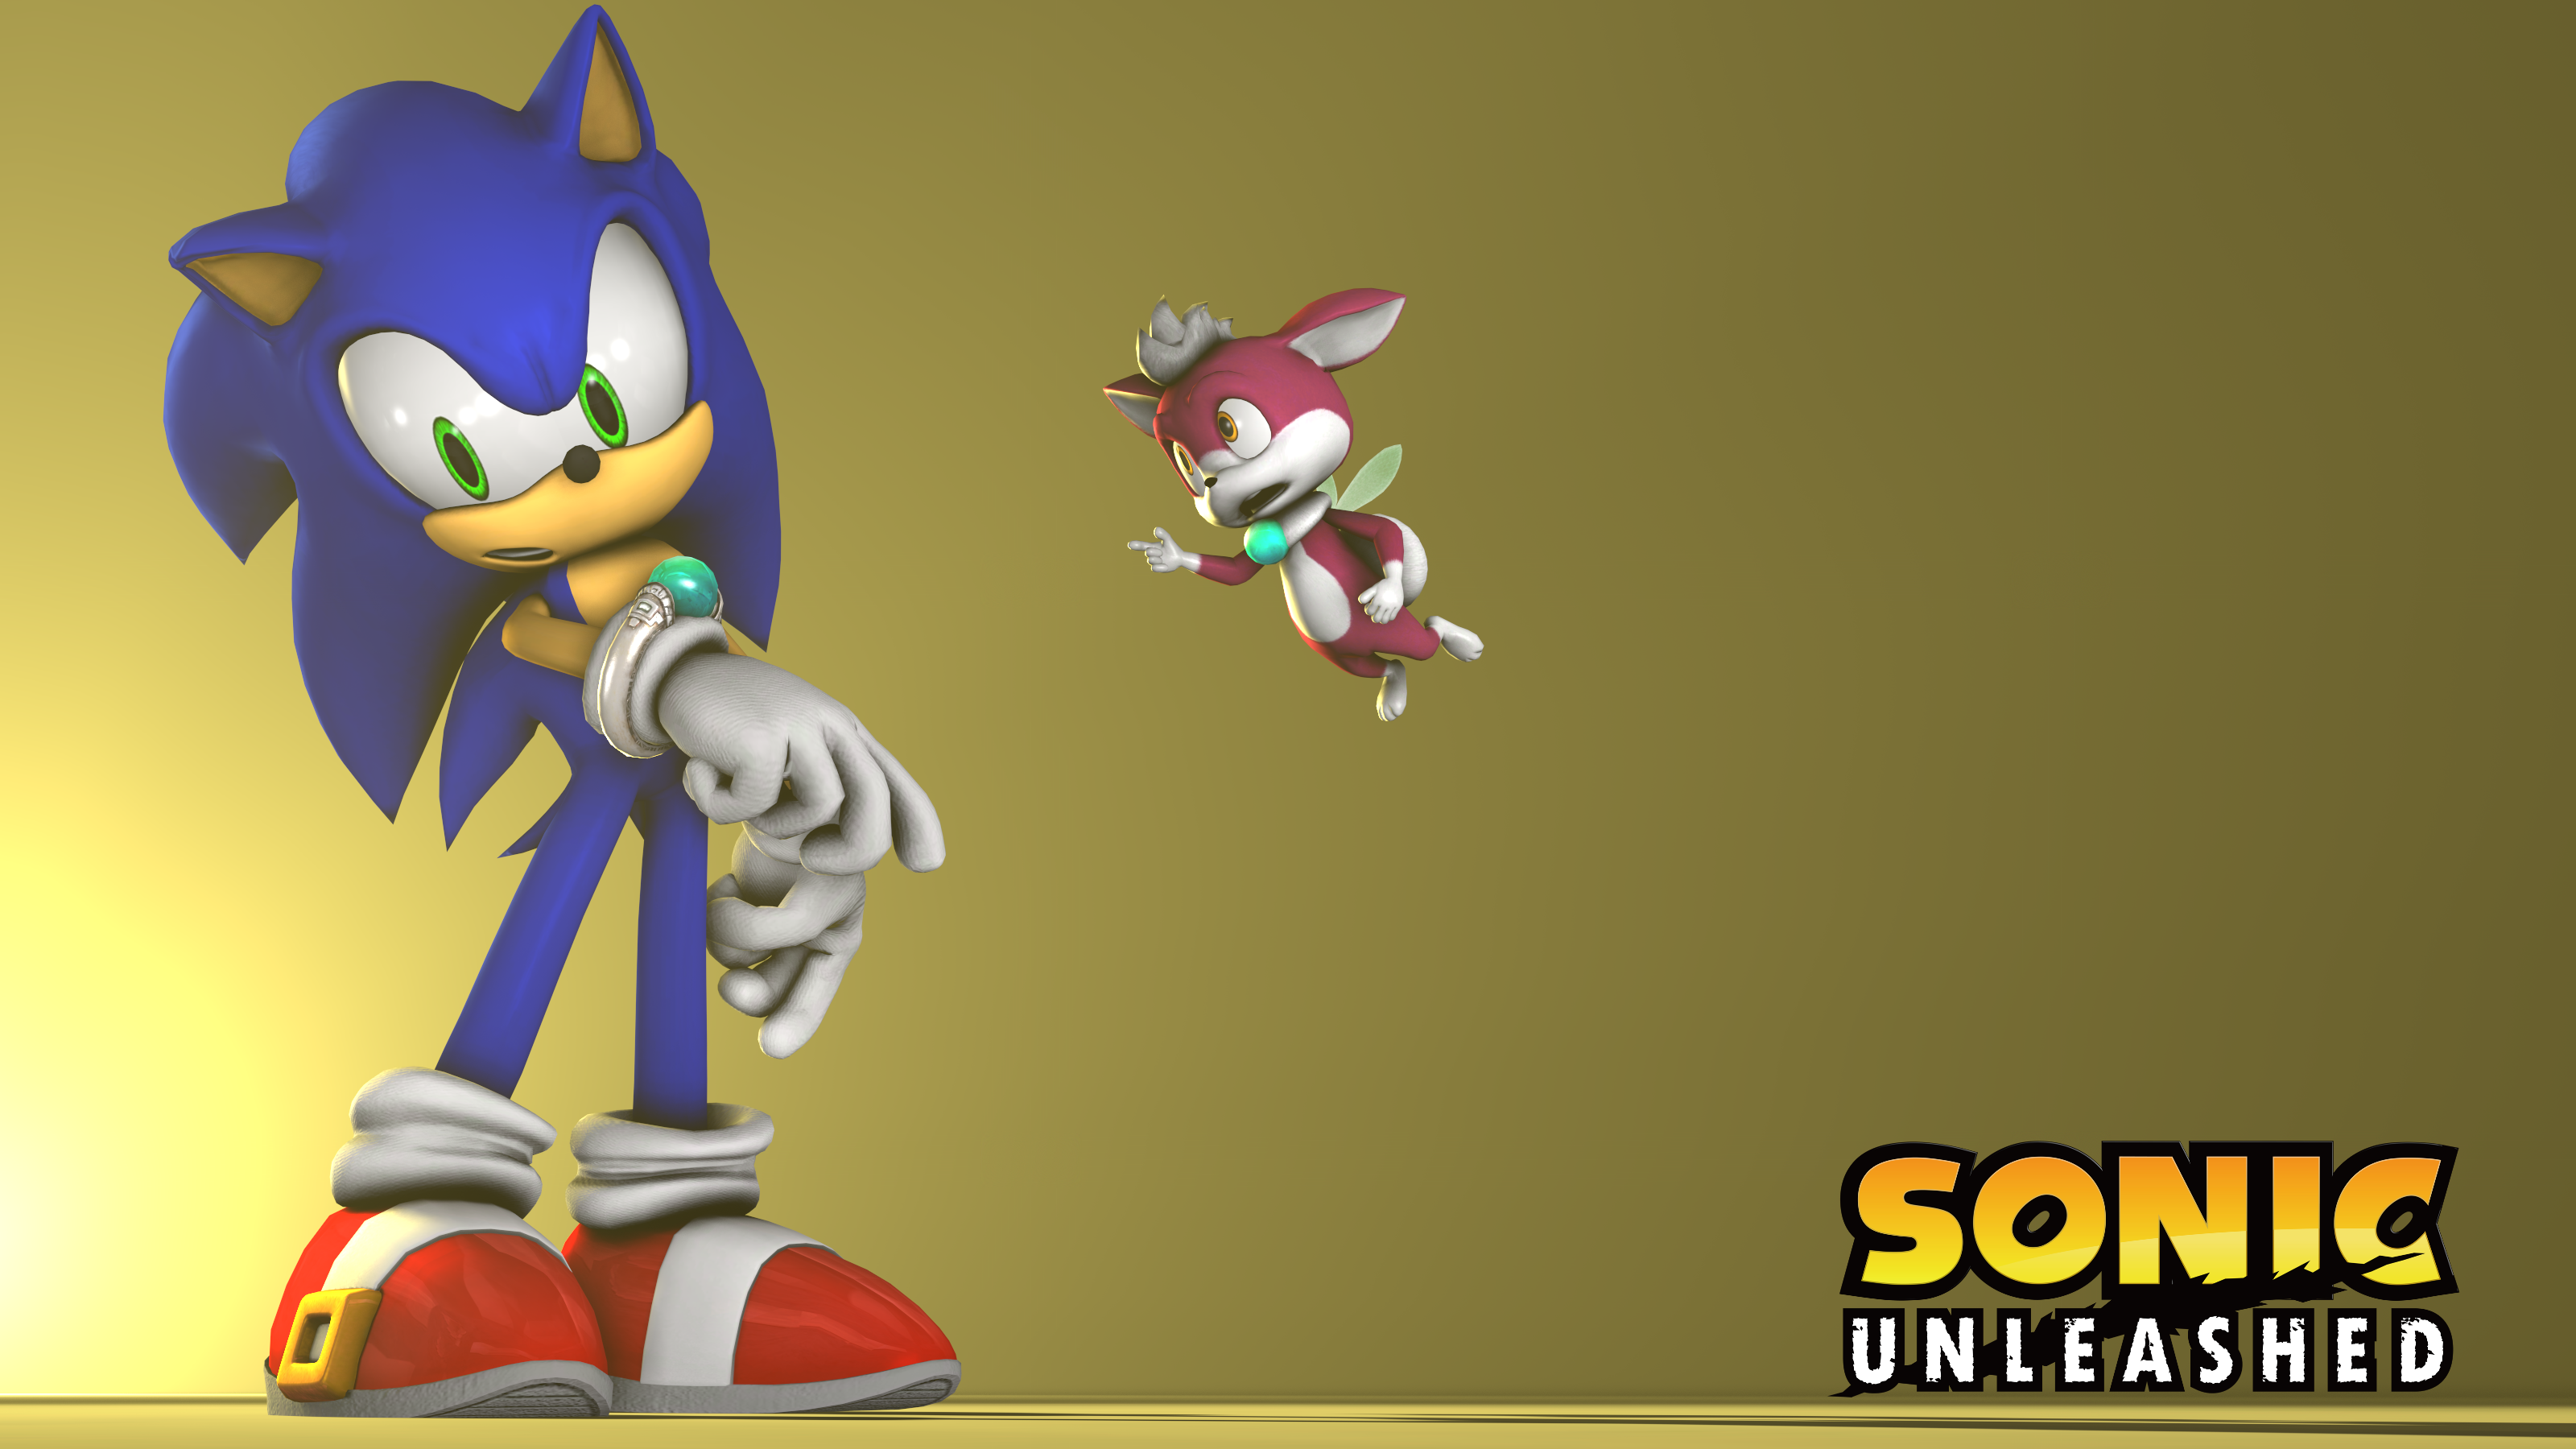 download sonic project x android